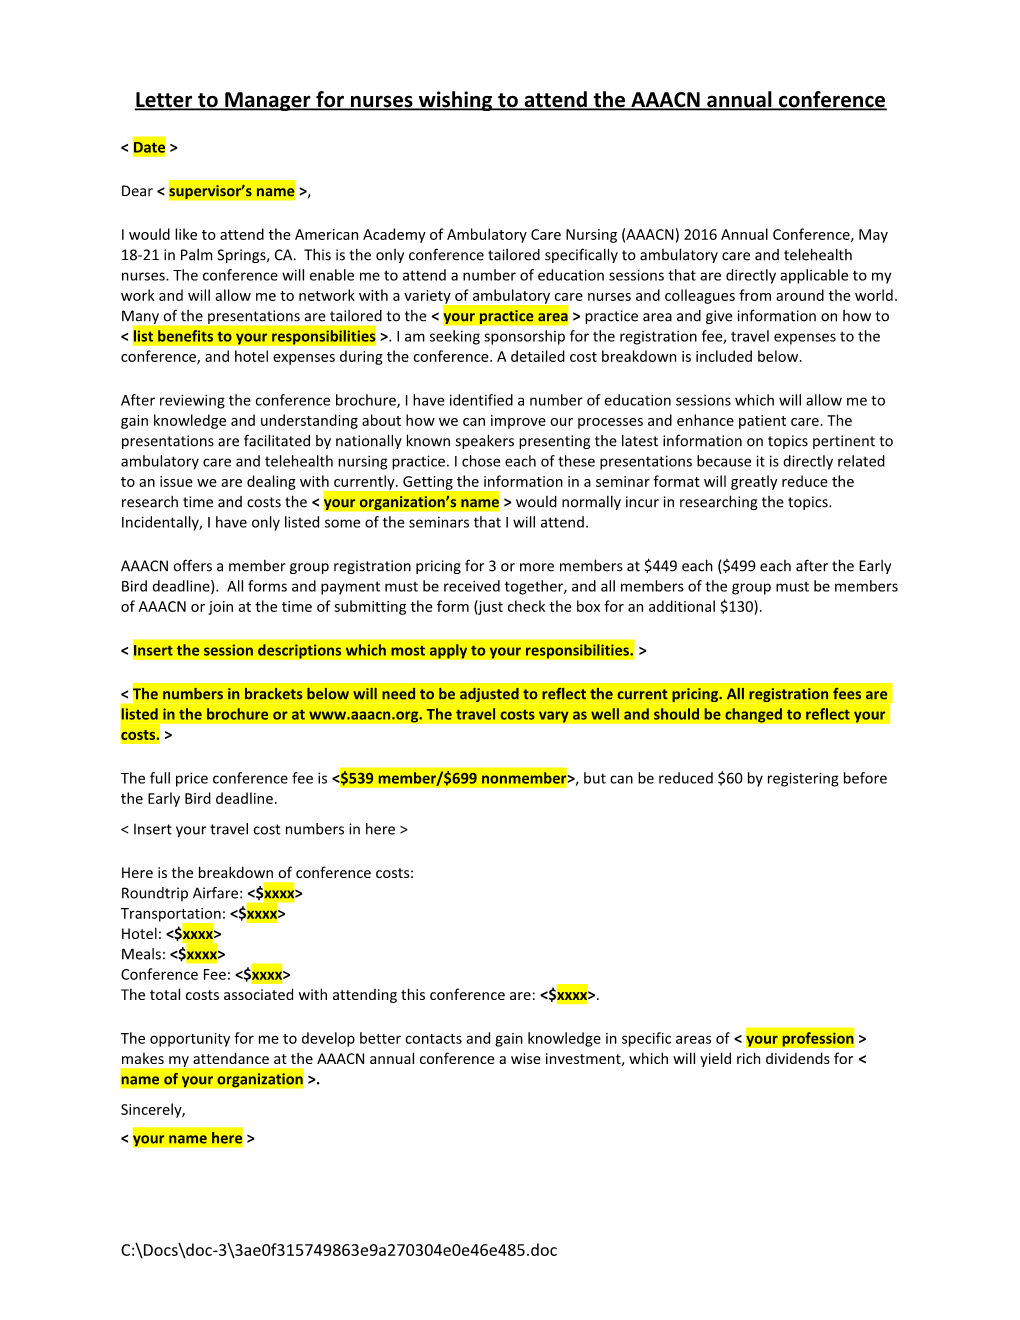 Letter to Manager for Marketing Professionals